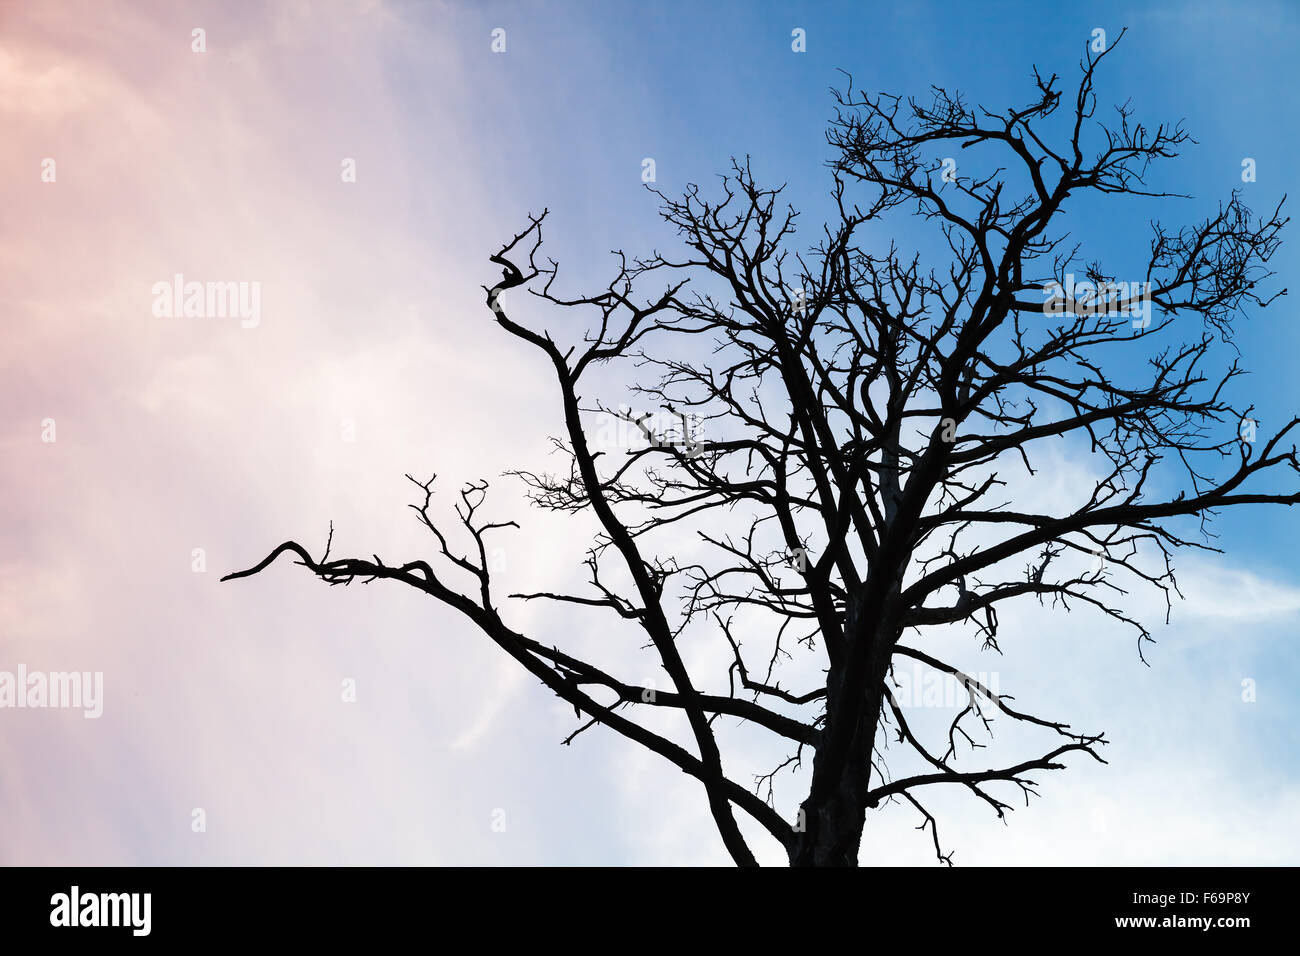 Dry dead tree on colorful evening sky background Stock Photo